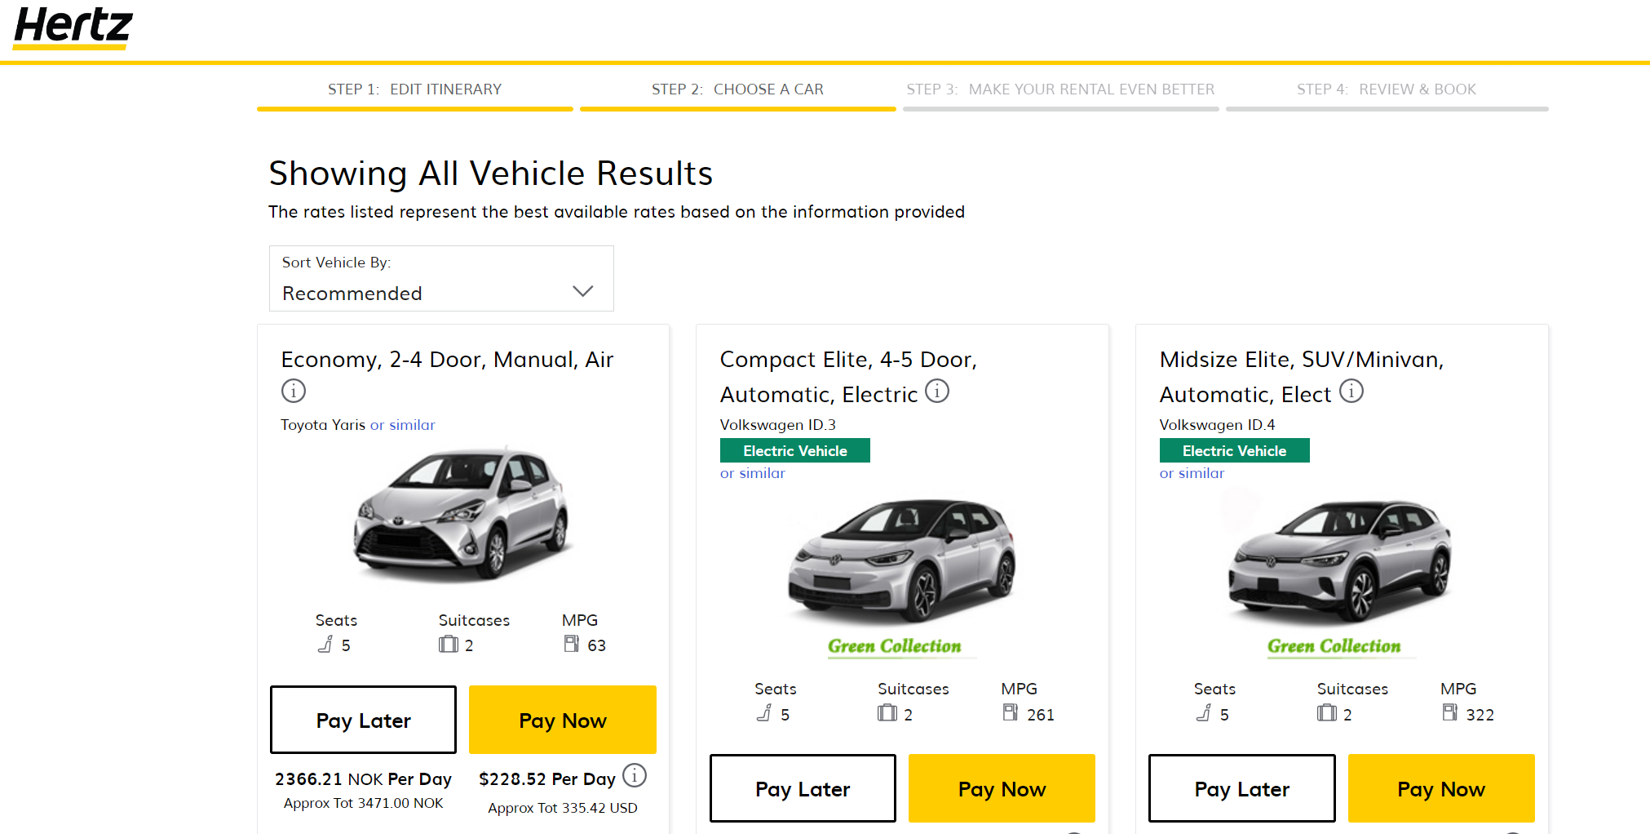 A search result page for Hertz rental cars in Europe showing two electric vehicle options prominently